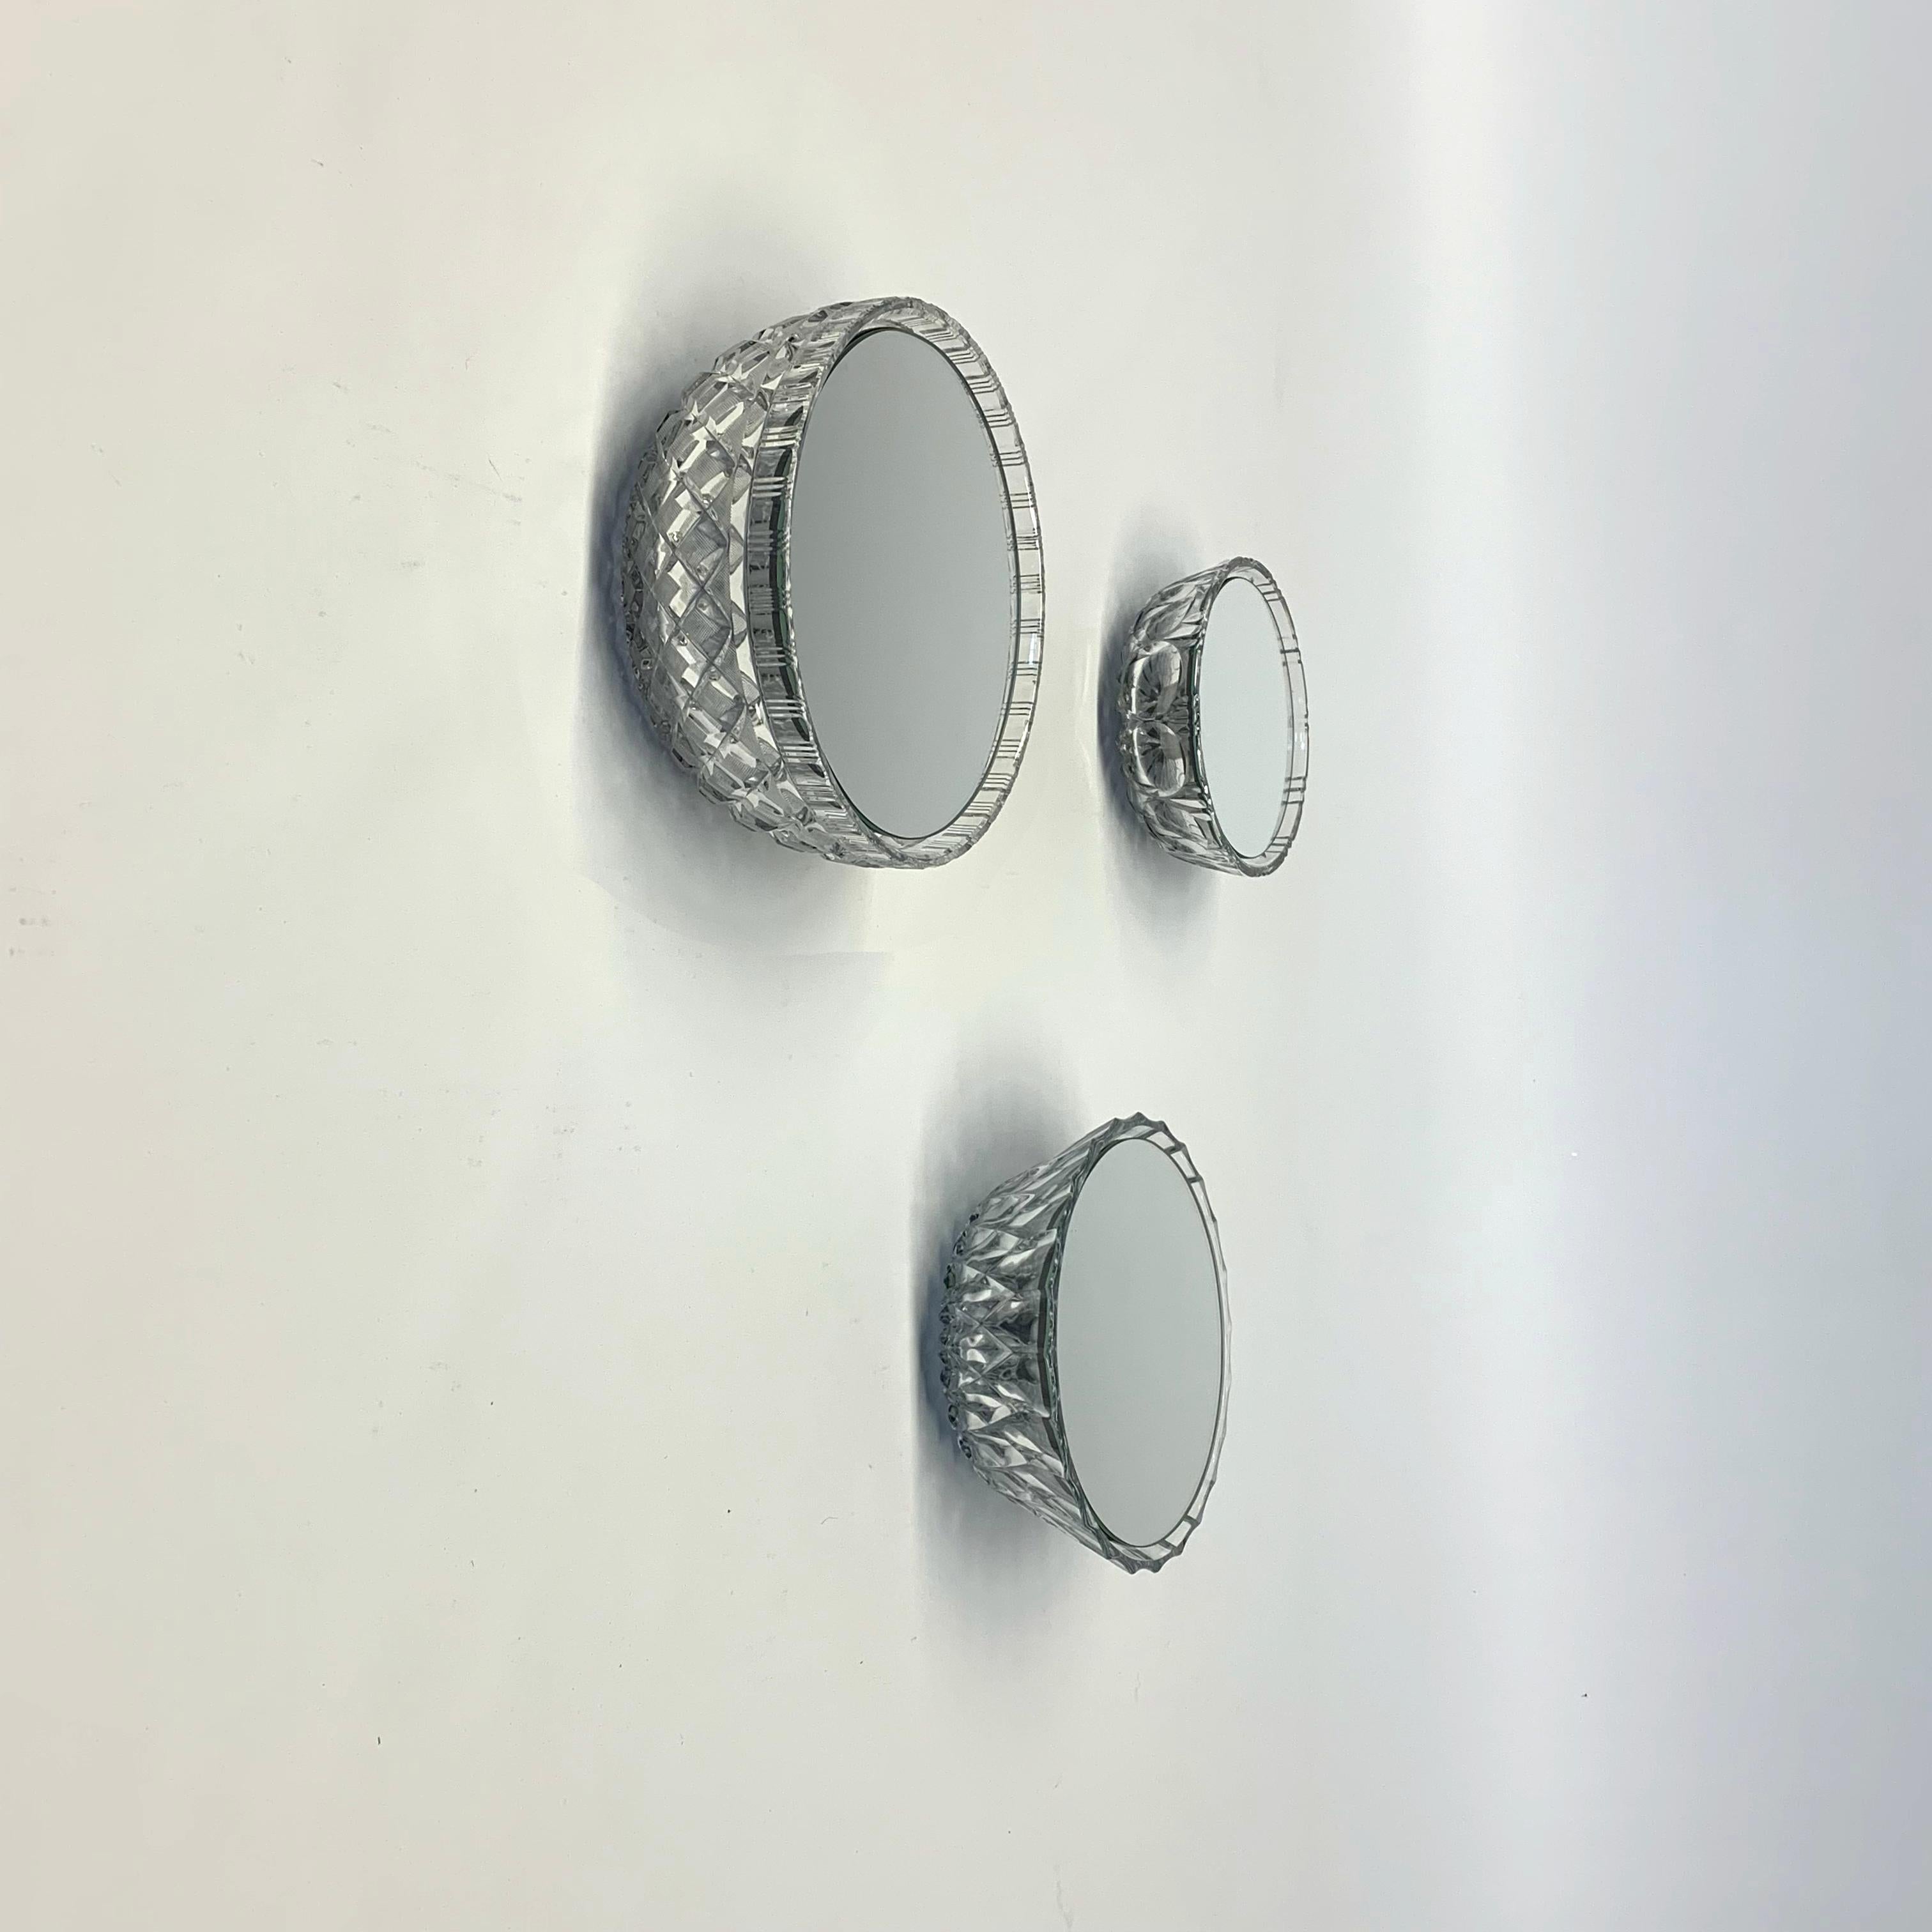 Wall mirrors - Saturn, made of vintage glass bowls:
Floating glass bowls and mirrors - invisible construction
The vintage glass bowl is easily and securely attached to the wall. A hole was drilled in the glass bowl and a metal sleeve was inserted.